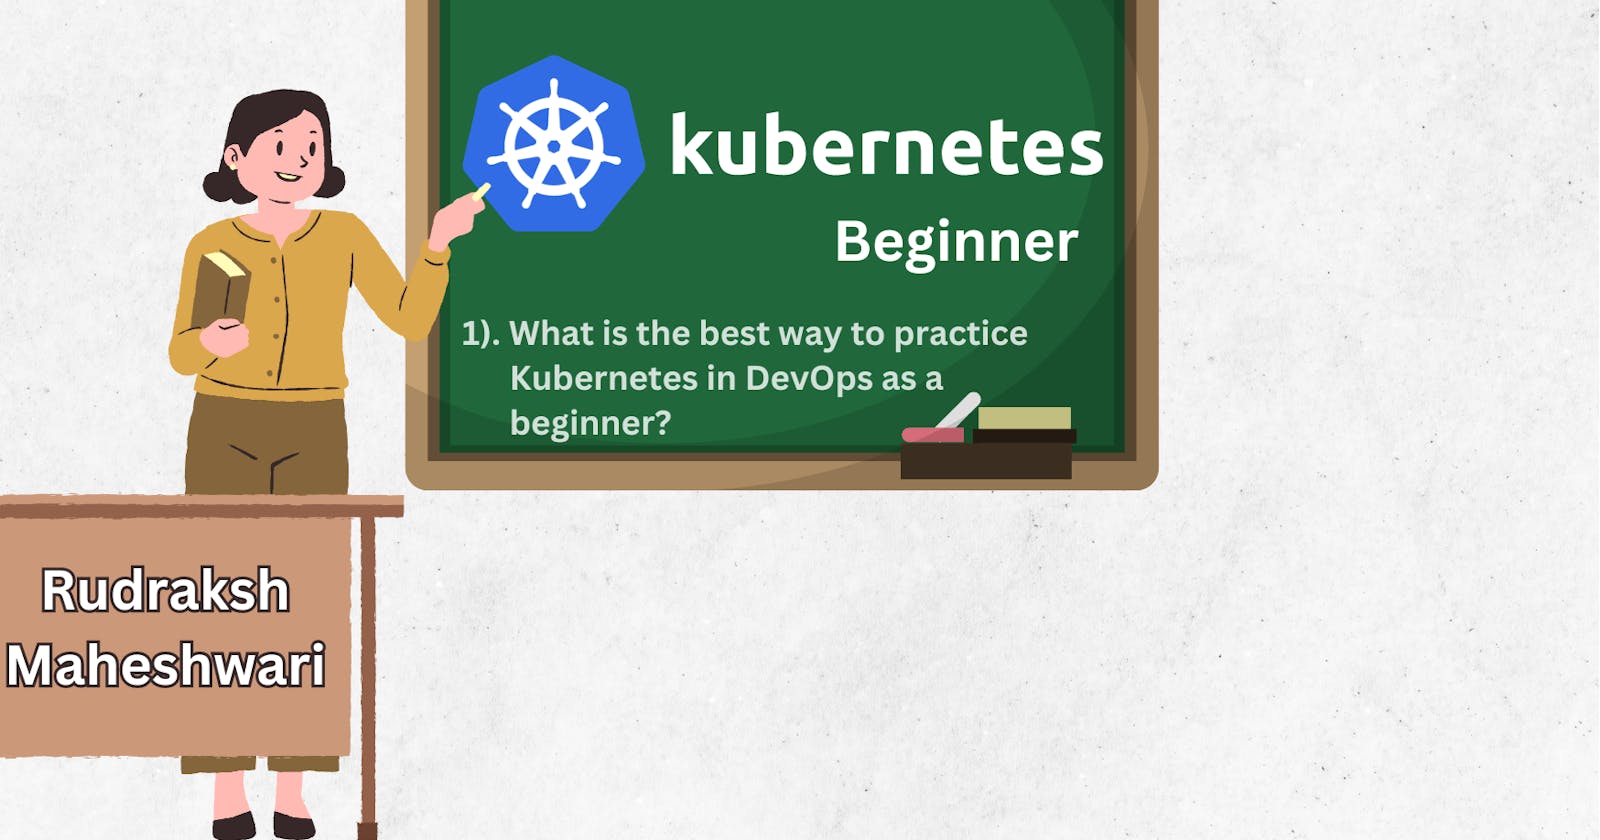 What is the best way to practice Kubernetes in DevOps as a beginner?